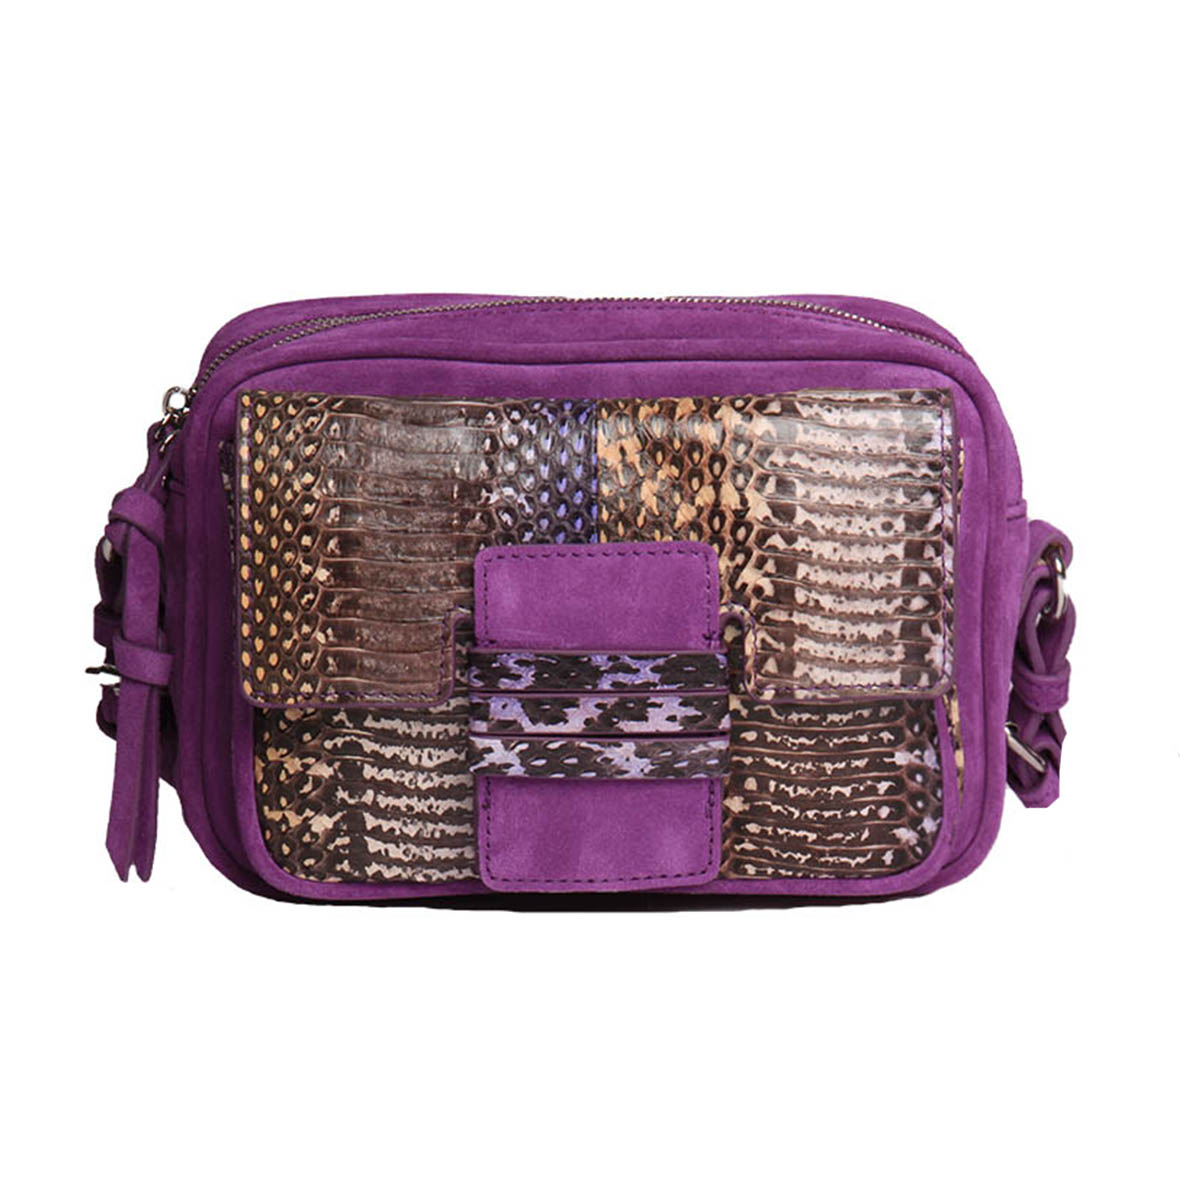 SAC ISAAC PM SNAKE TRICOLORE VIOLET